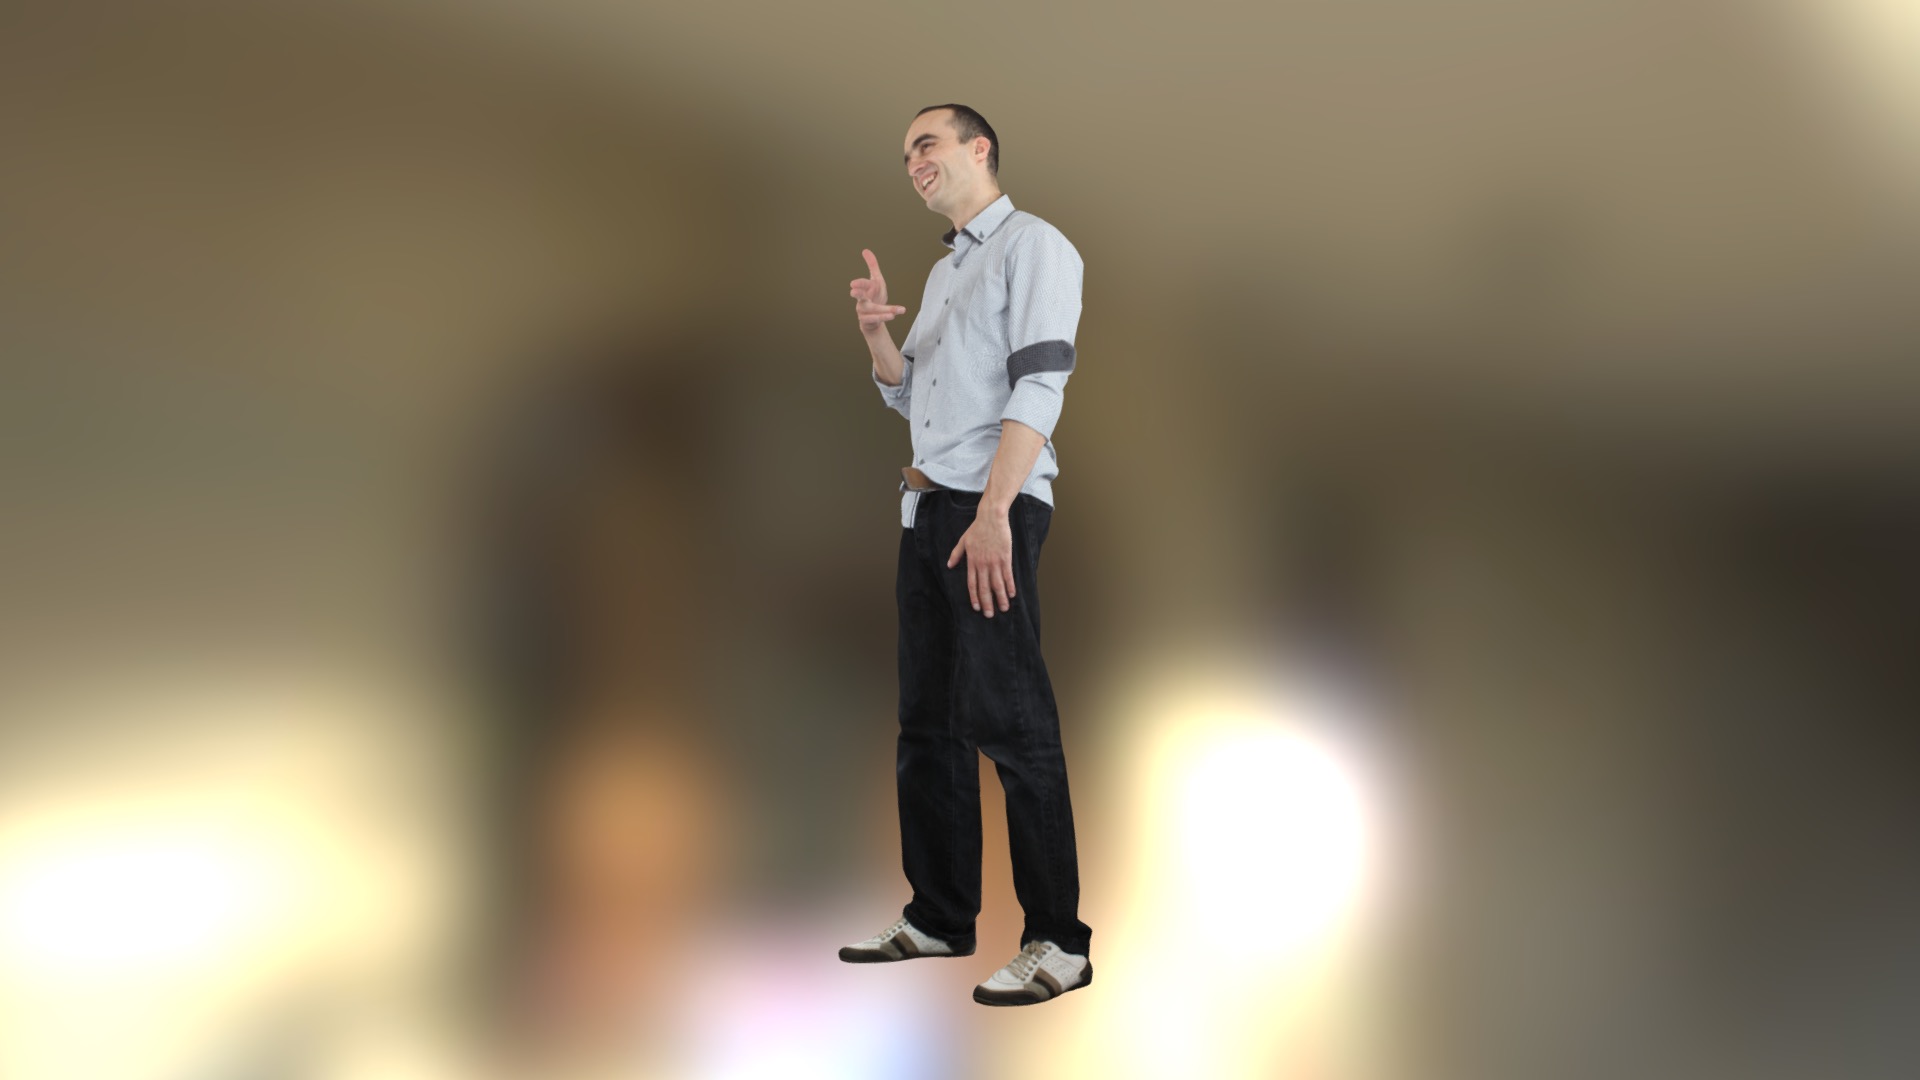 3D model Edin - This is a 3D model of the Edin. The 3D model is about a man standing with his hand up.